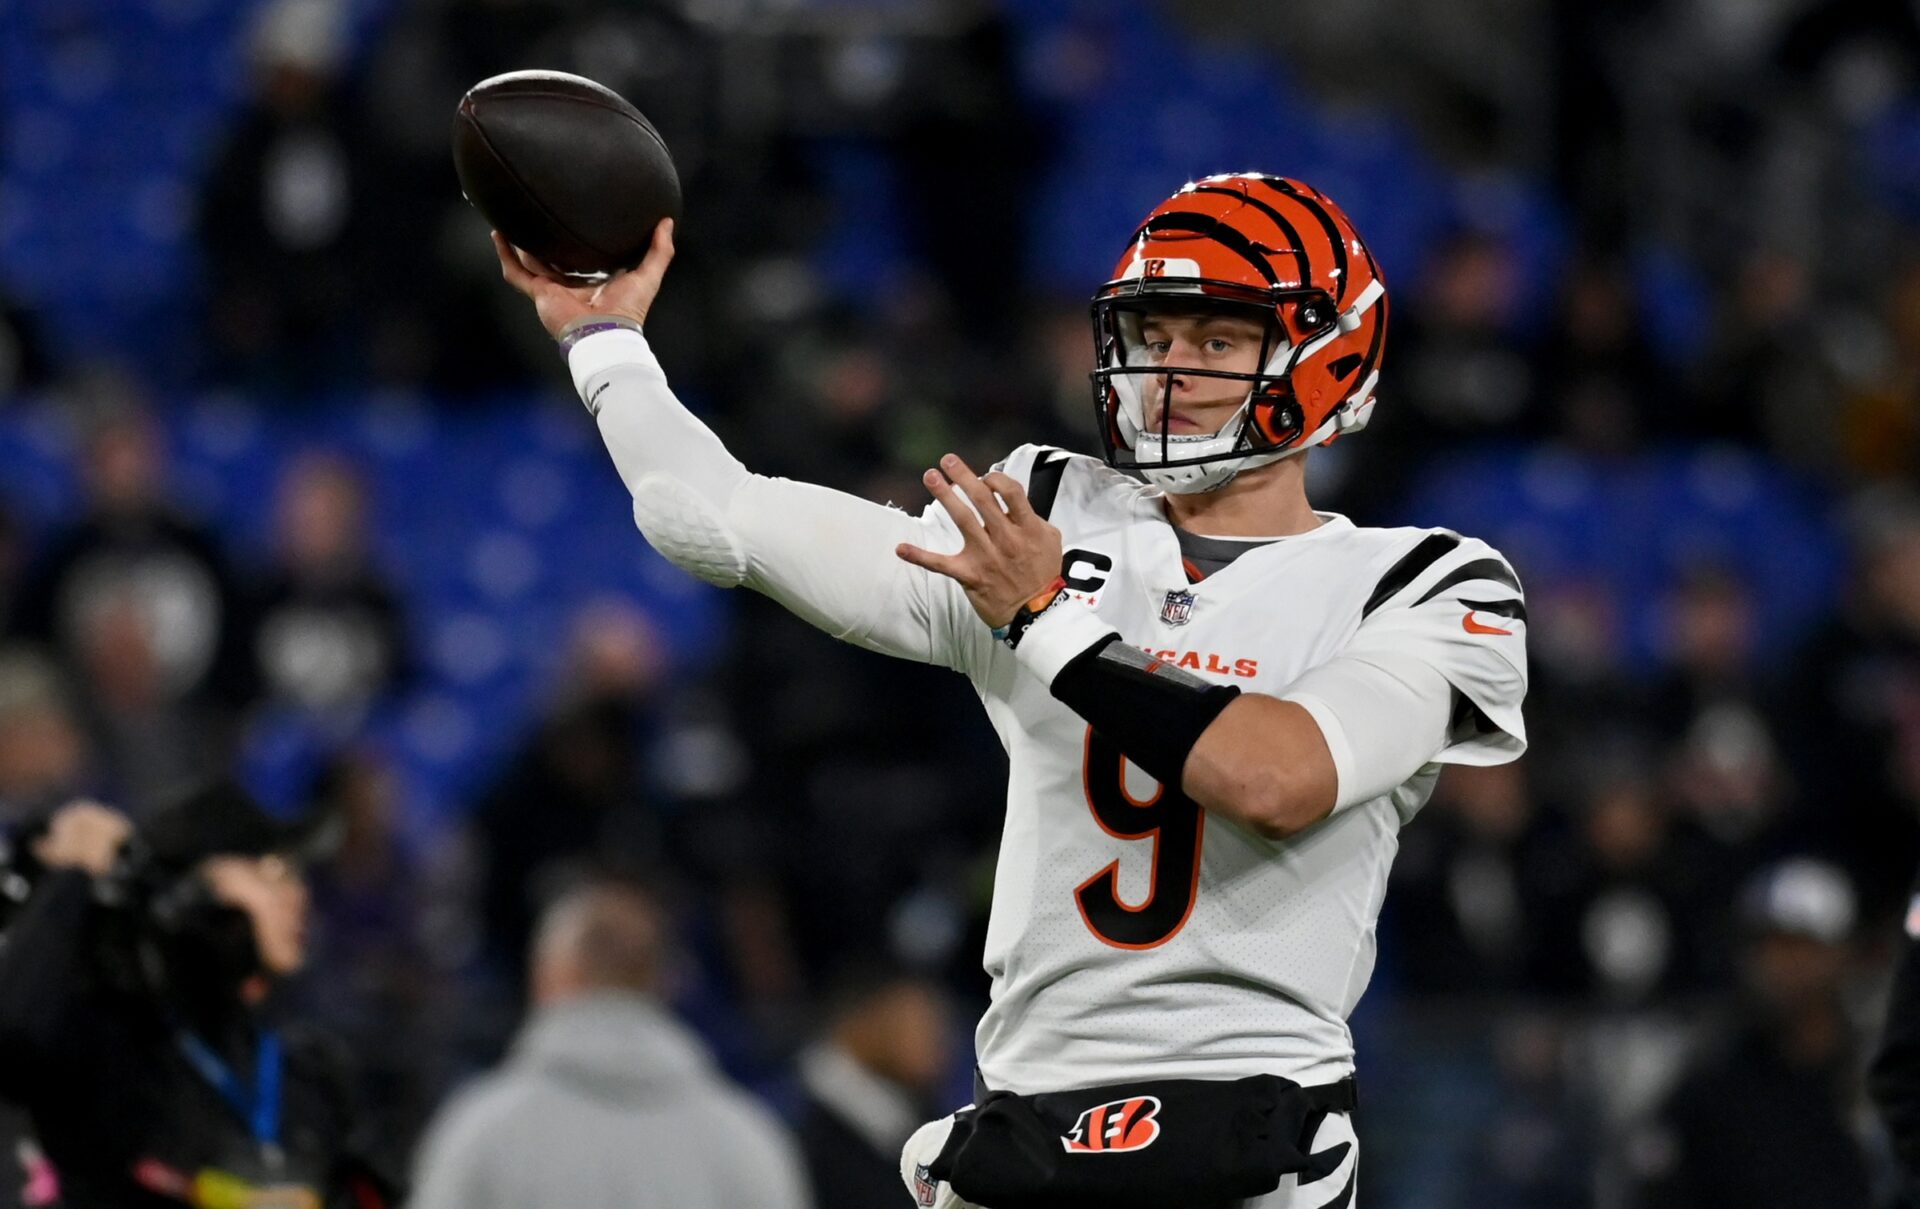 Cincinnati Bengals quarterback Joe Burrow (9) warms up before a game against the Baltimore Ravens at M&T Bank Stadium. Mandatory Credit: Tommy Gilligan-USA TODAY Sports